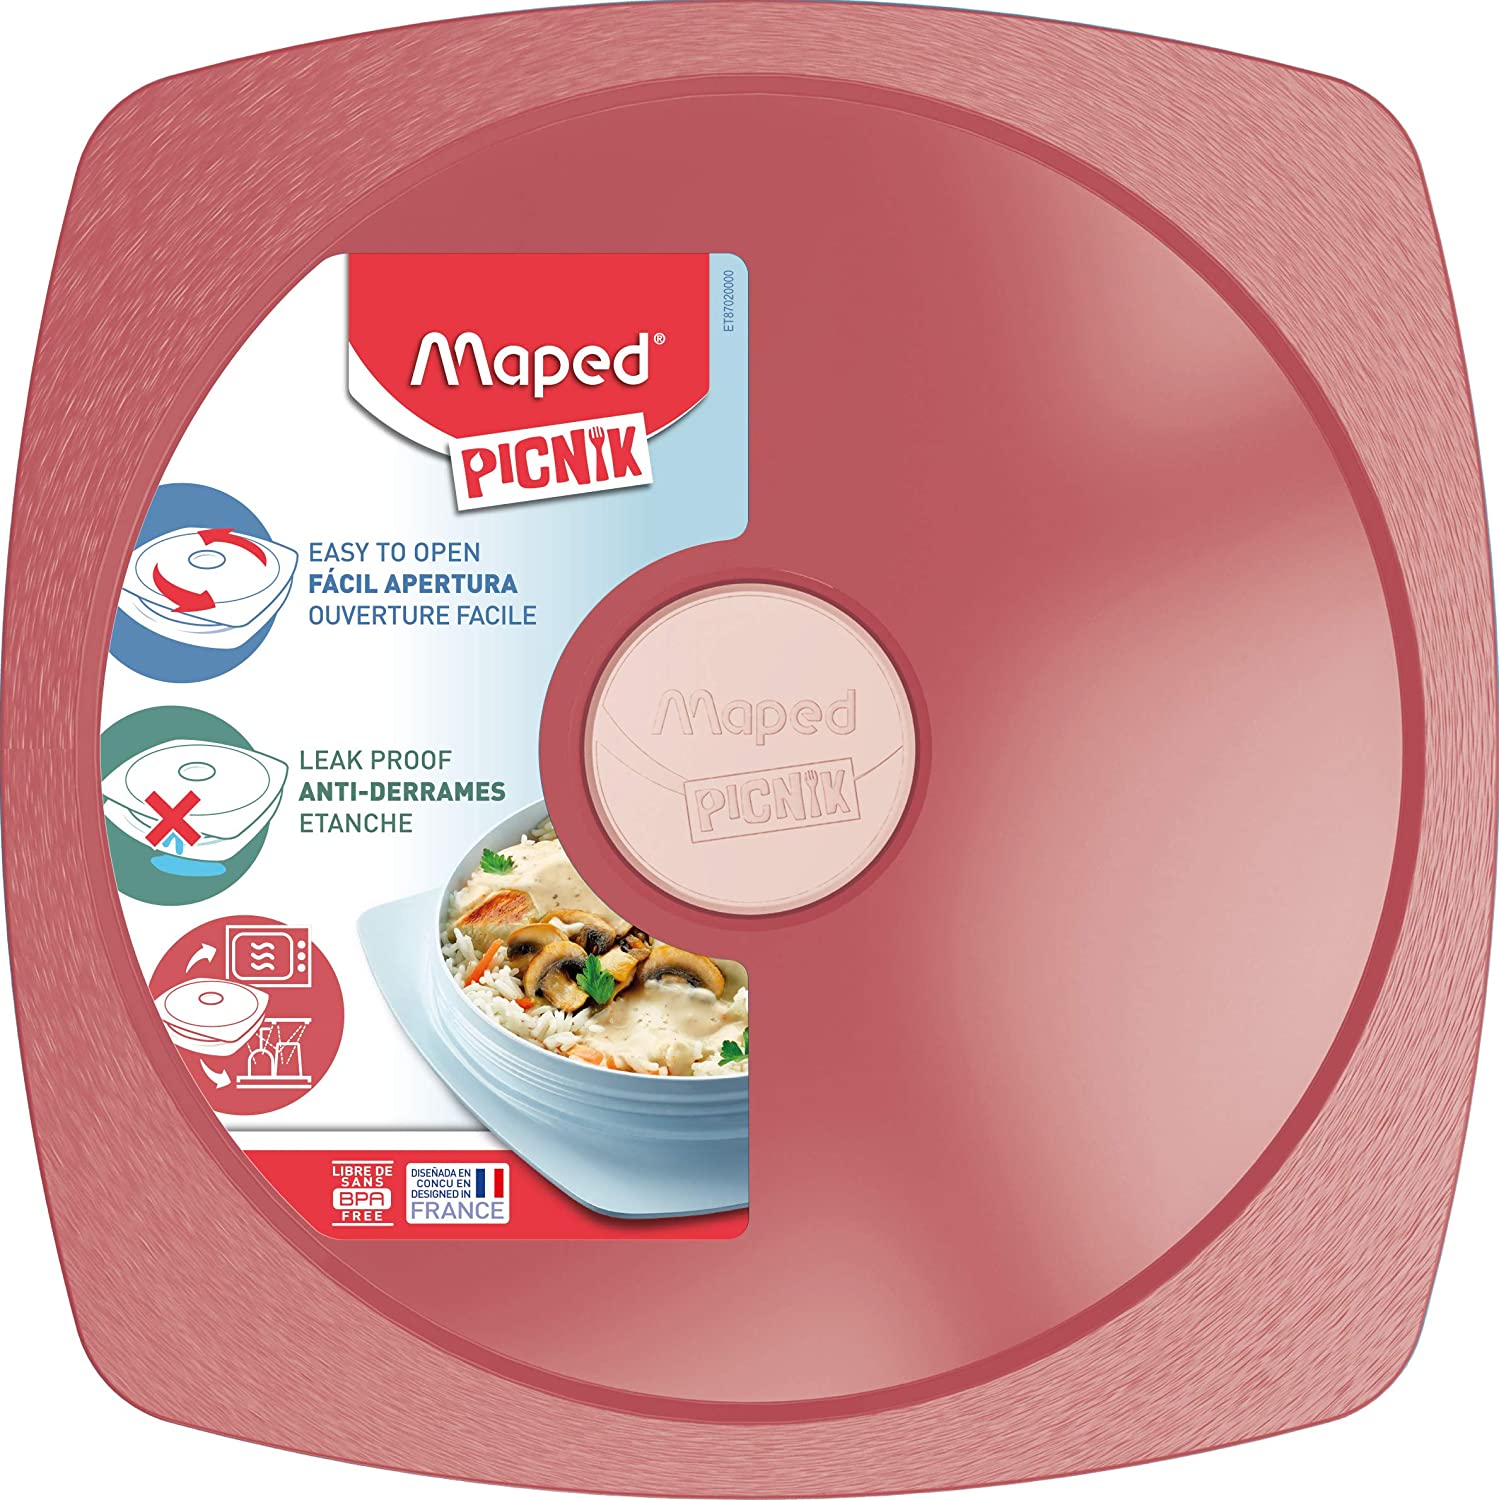 Maped Picnik Lunch plate Adult Concept - DNA